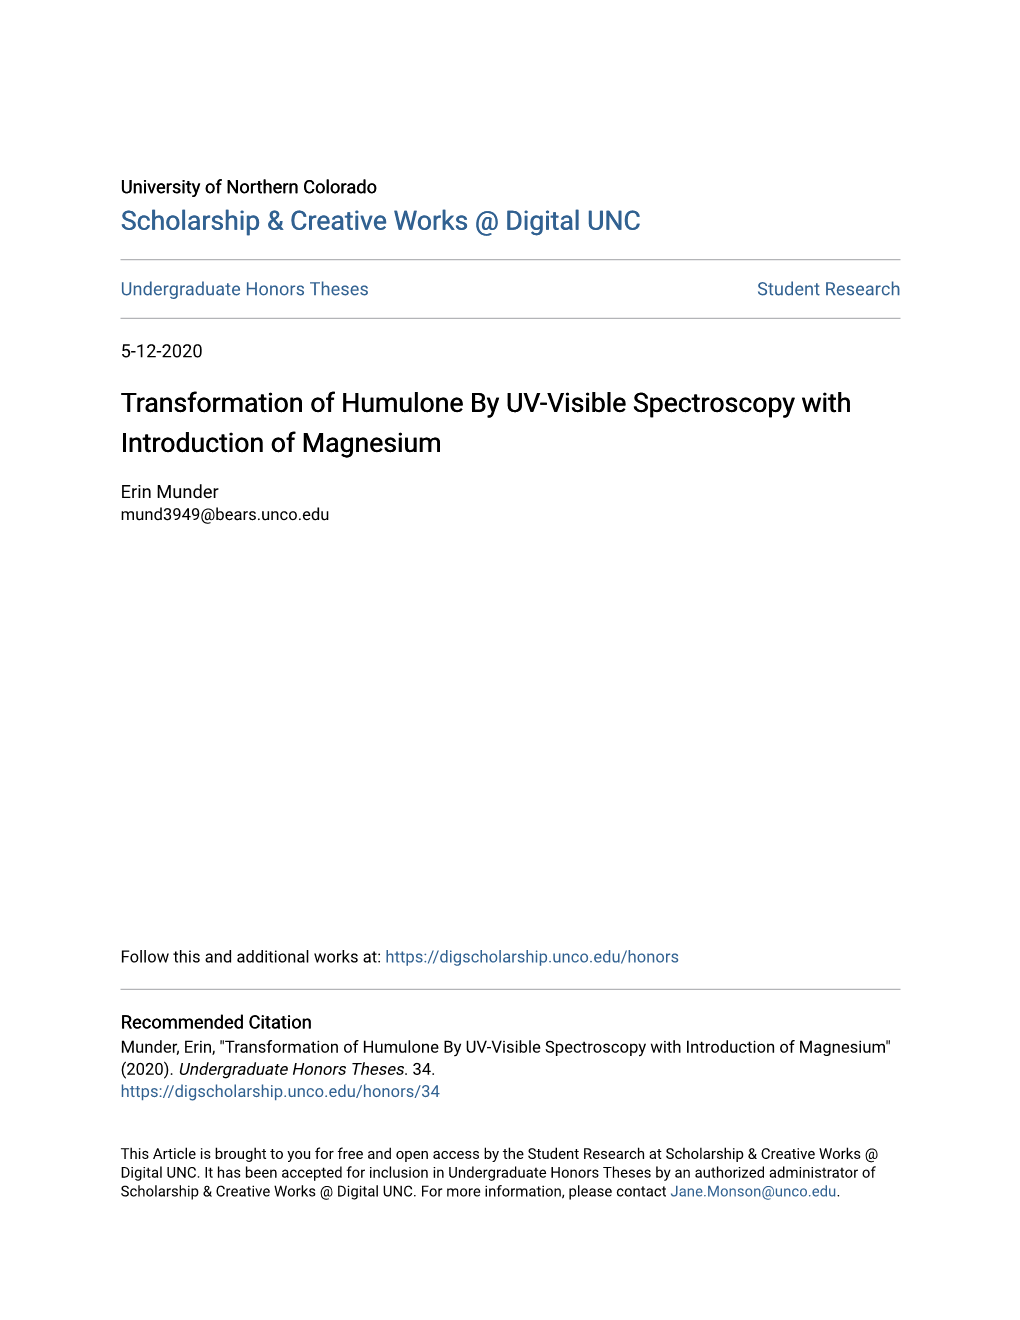 Transformation of Humulone by UV-Visible Spectroscopy with Introduction of Magnesium